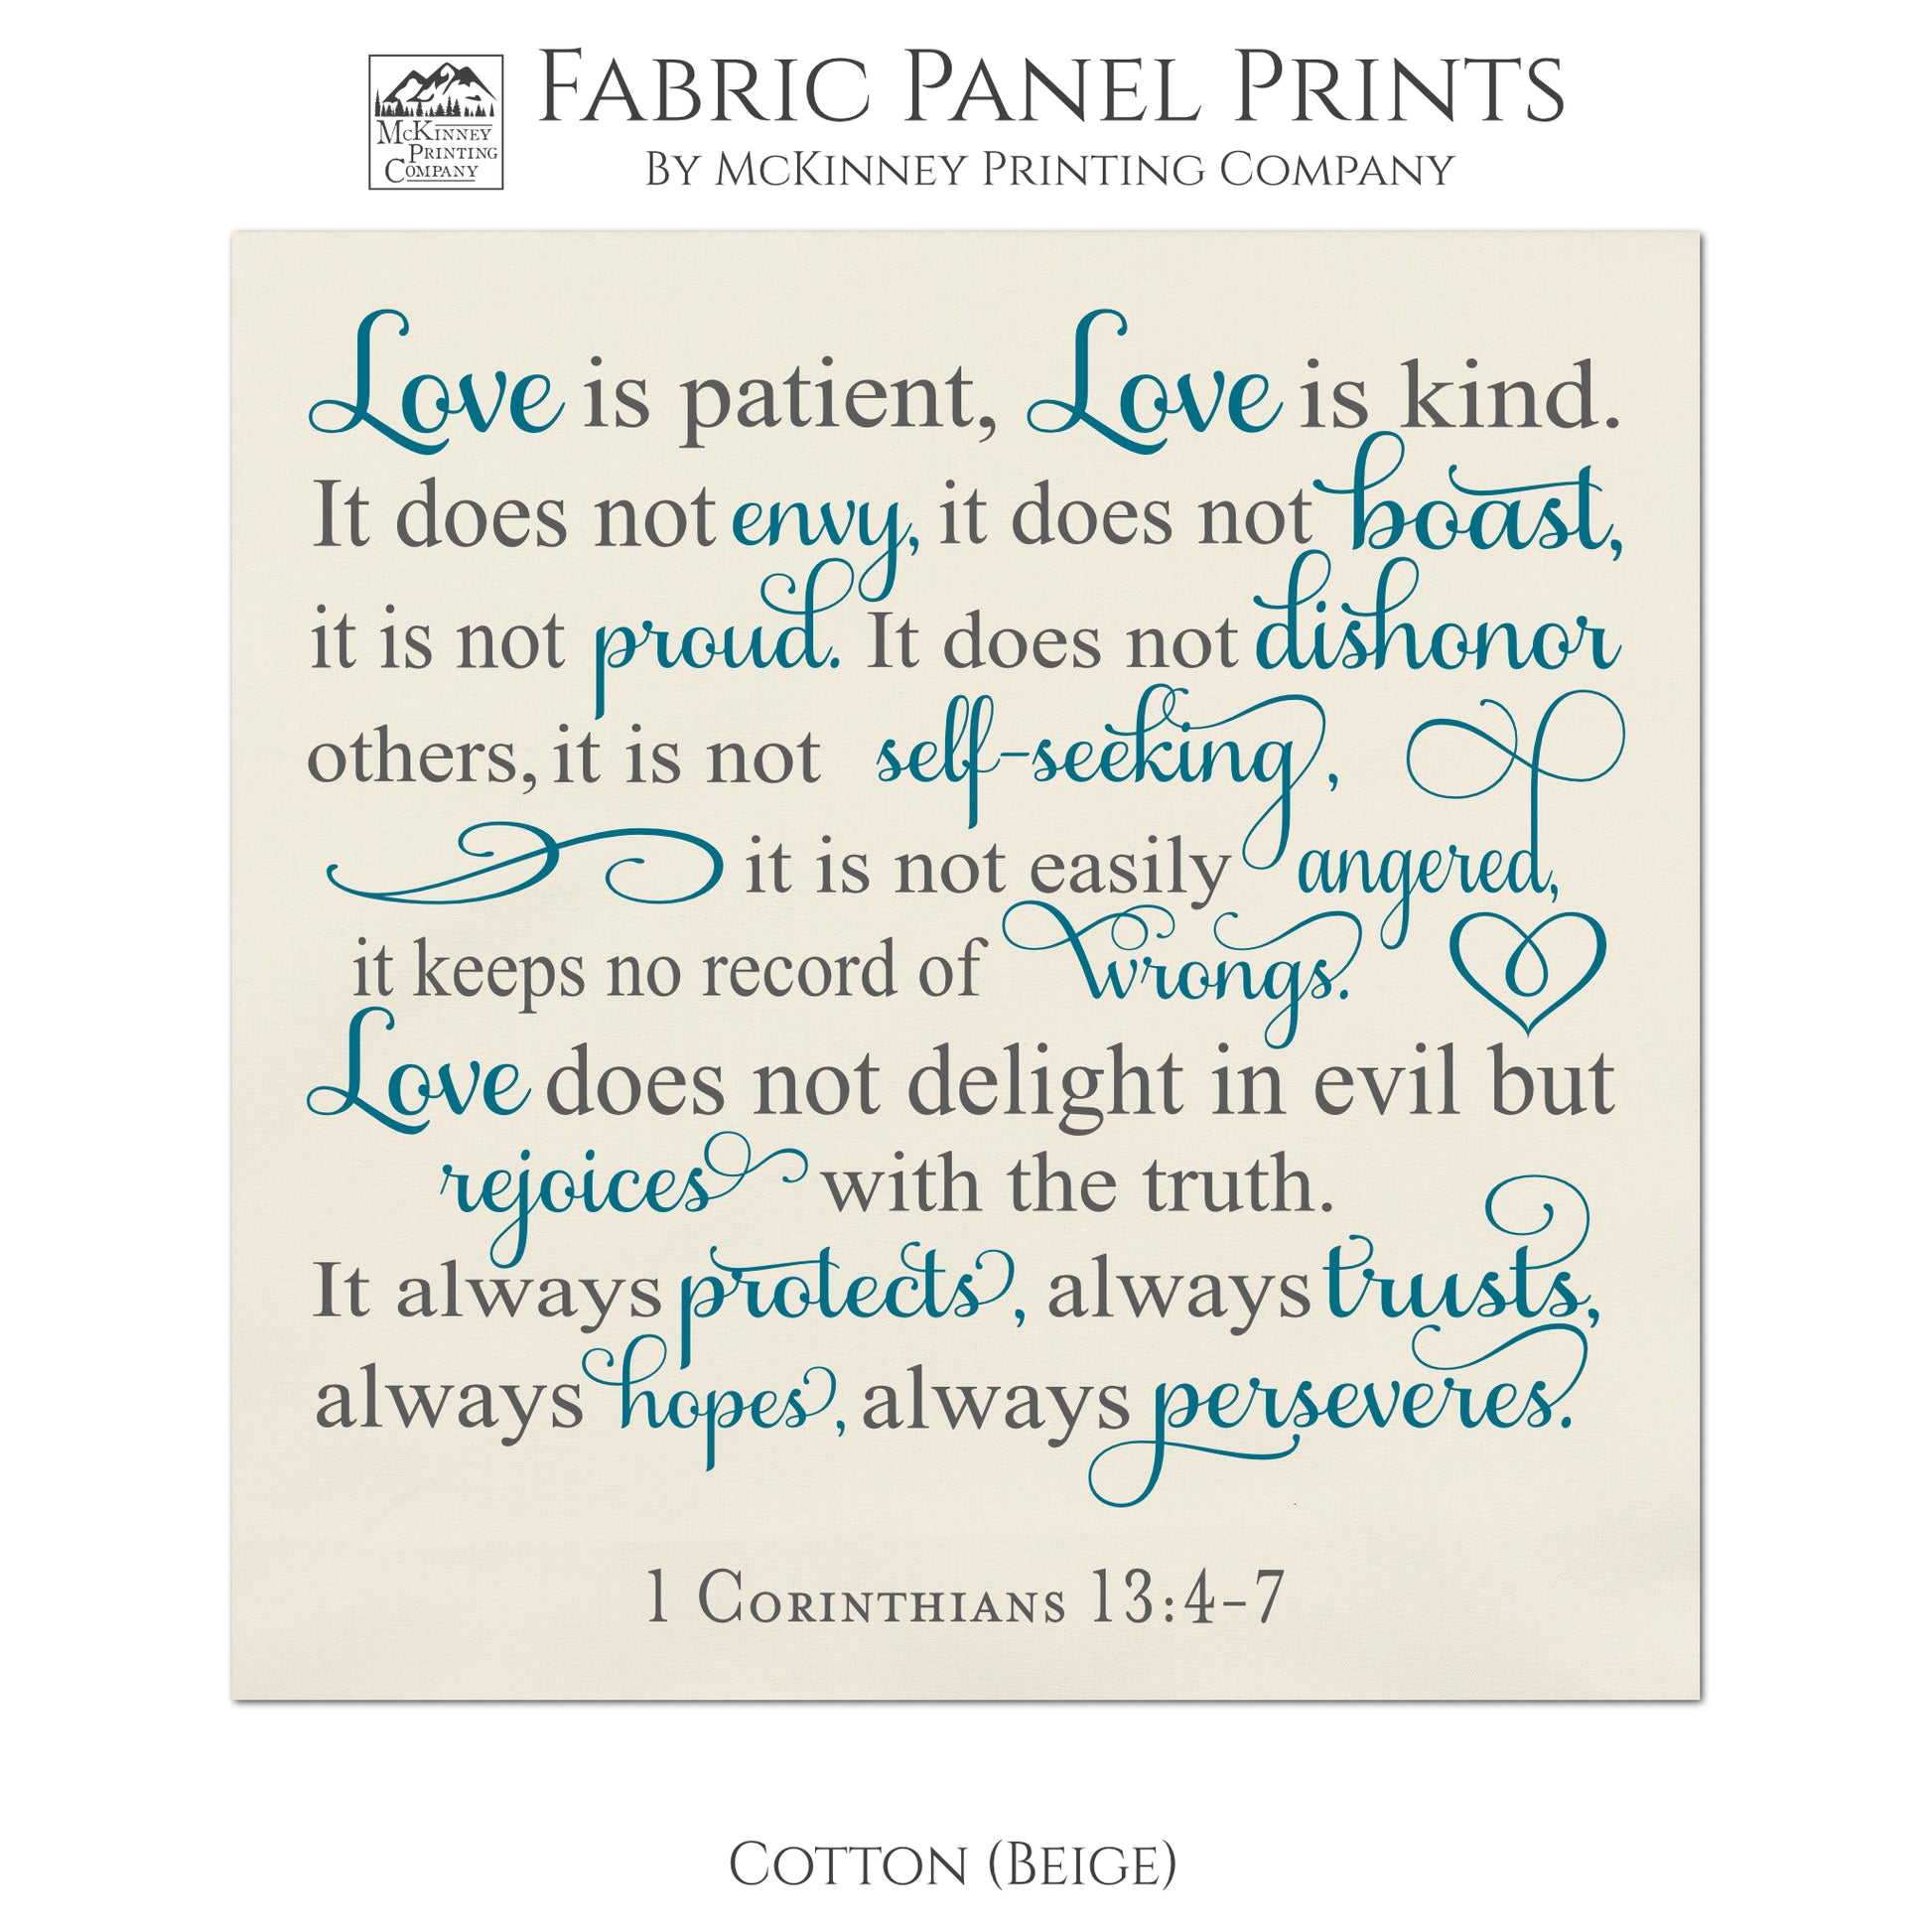 1 Corinthians 13, 4-7, Love is Patient, Love is Kind, Fabric Panel for Quilting, Sewing or Wall Art - Cotton, Beige